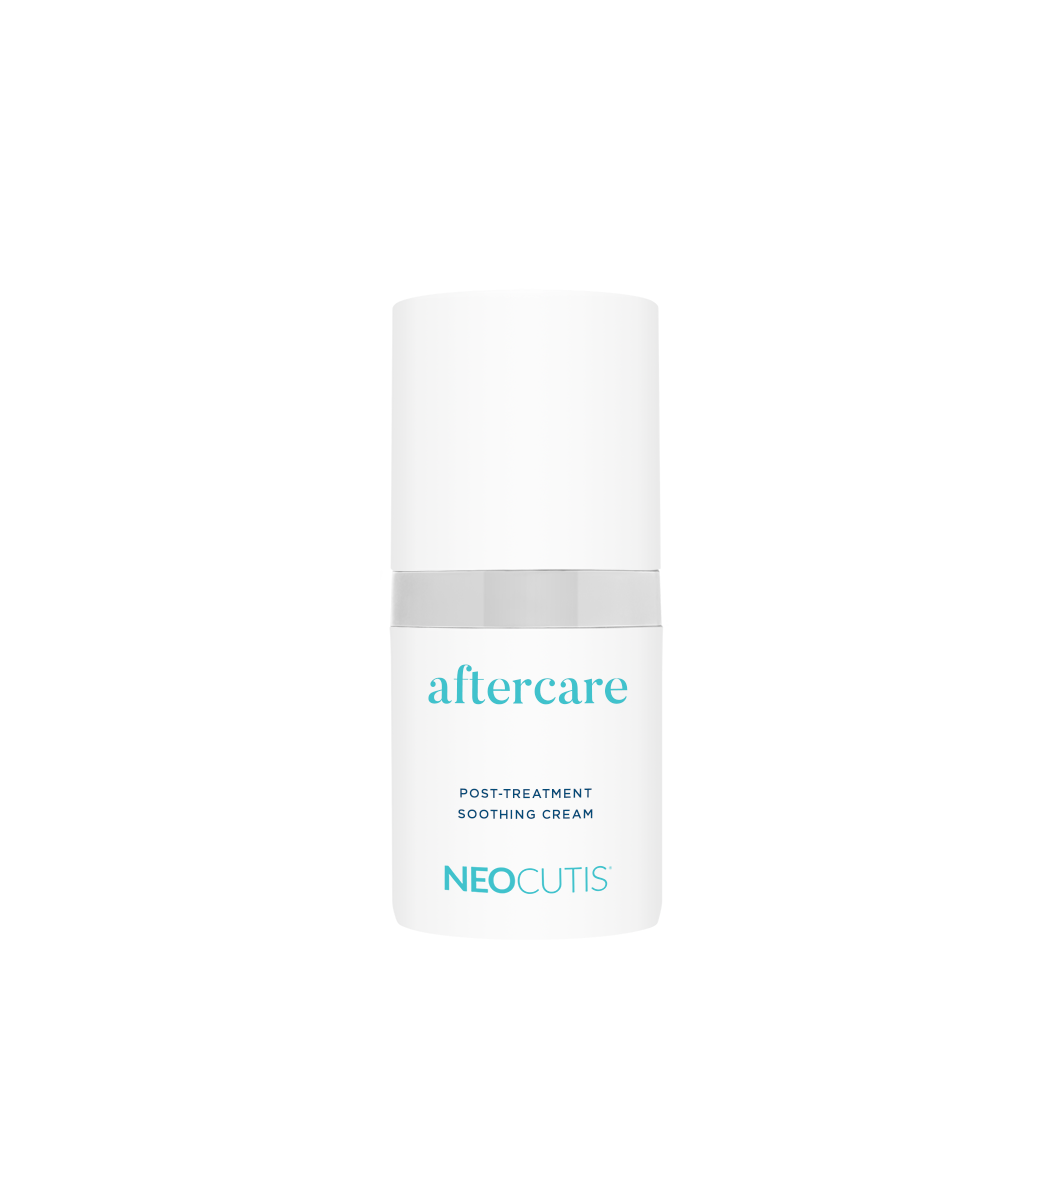 AFTERCARE Post-Treatment Soothing Cream